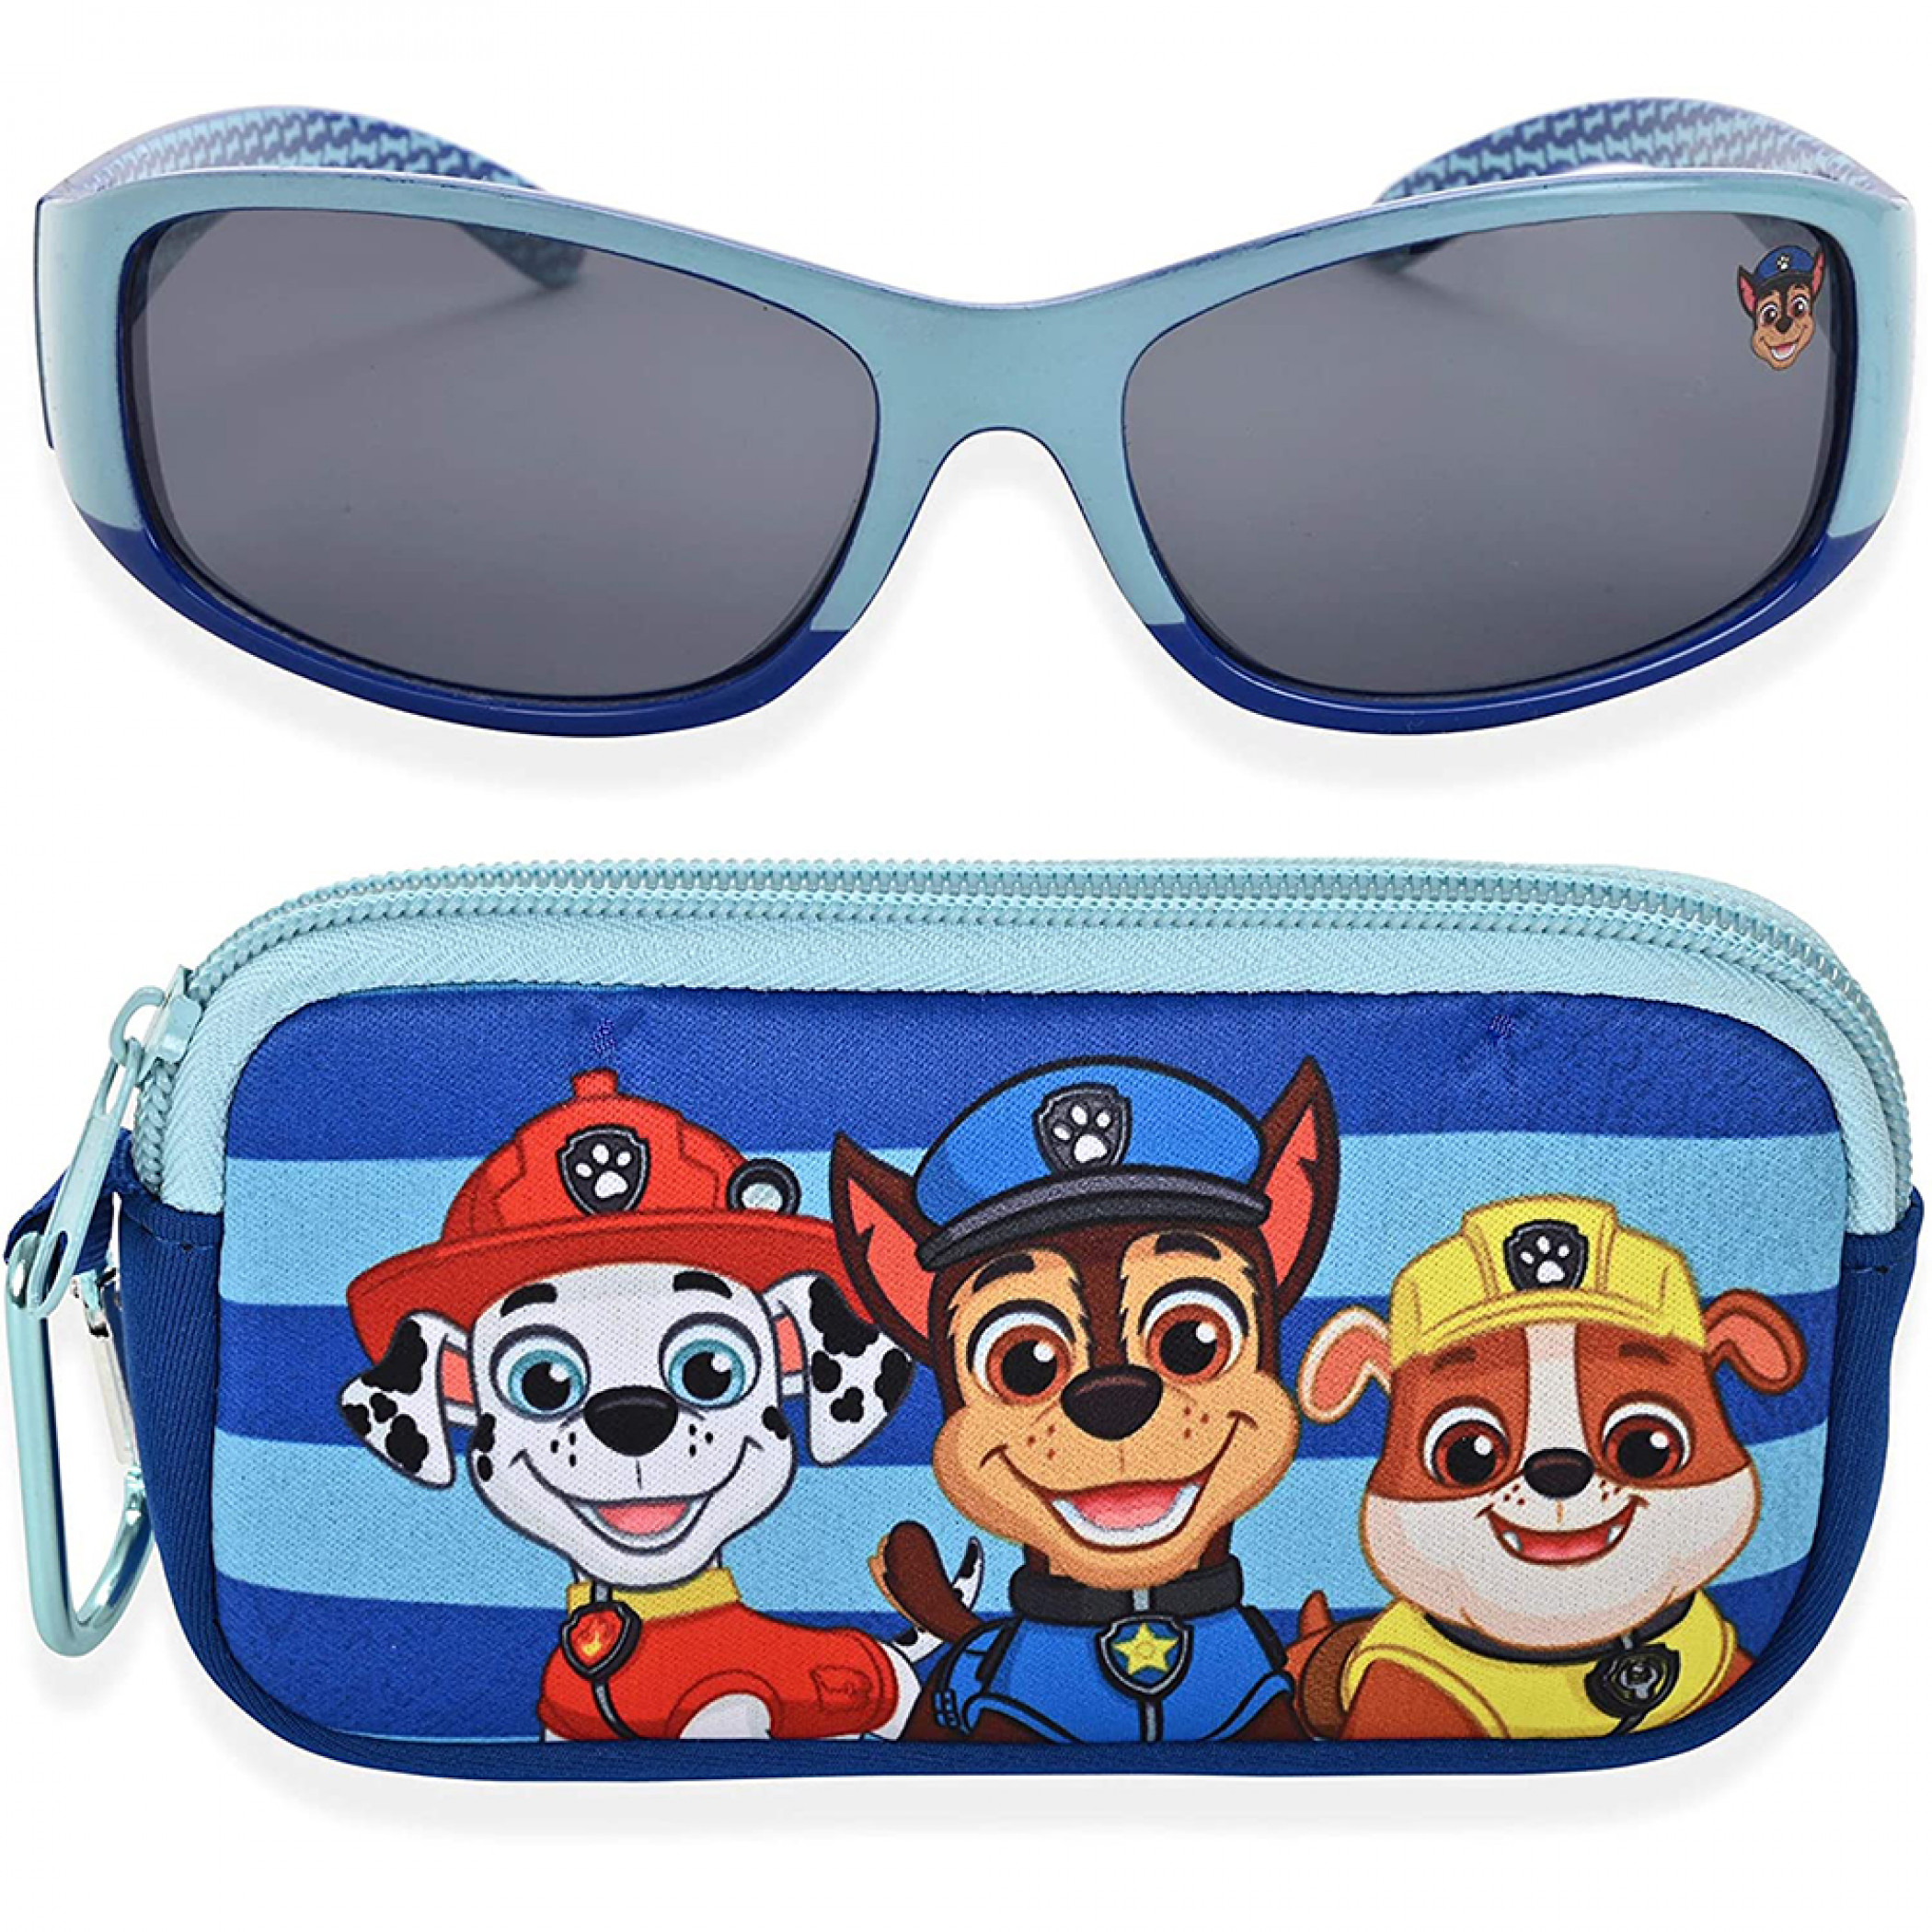 https://mmv2api.s3.us-east-2.amazonaws.com/products/images/Nickelodeon%20Paw%20Patrol%20Kids%20Sunglasses%20with%20Glasses%20Case%20and%20UV%20Protection-0.jpg